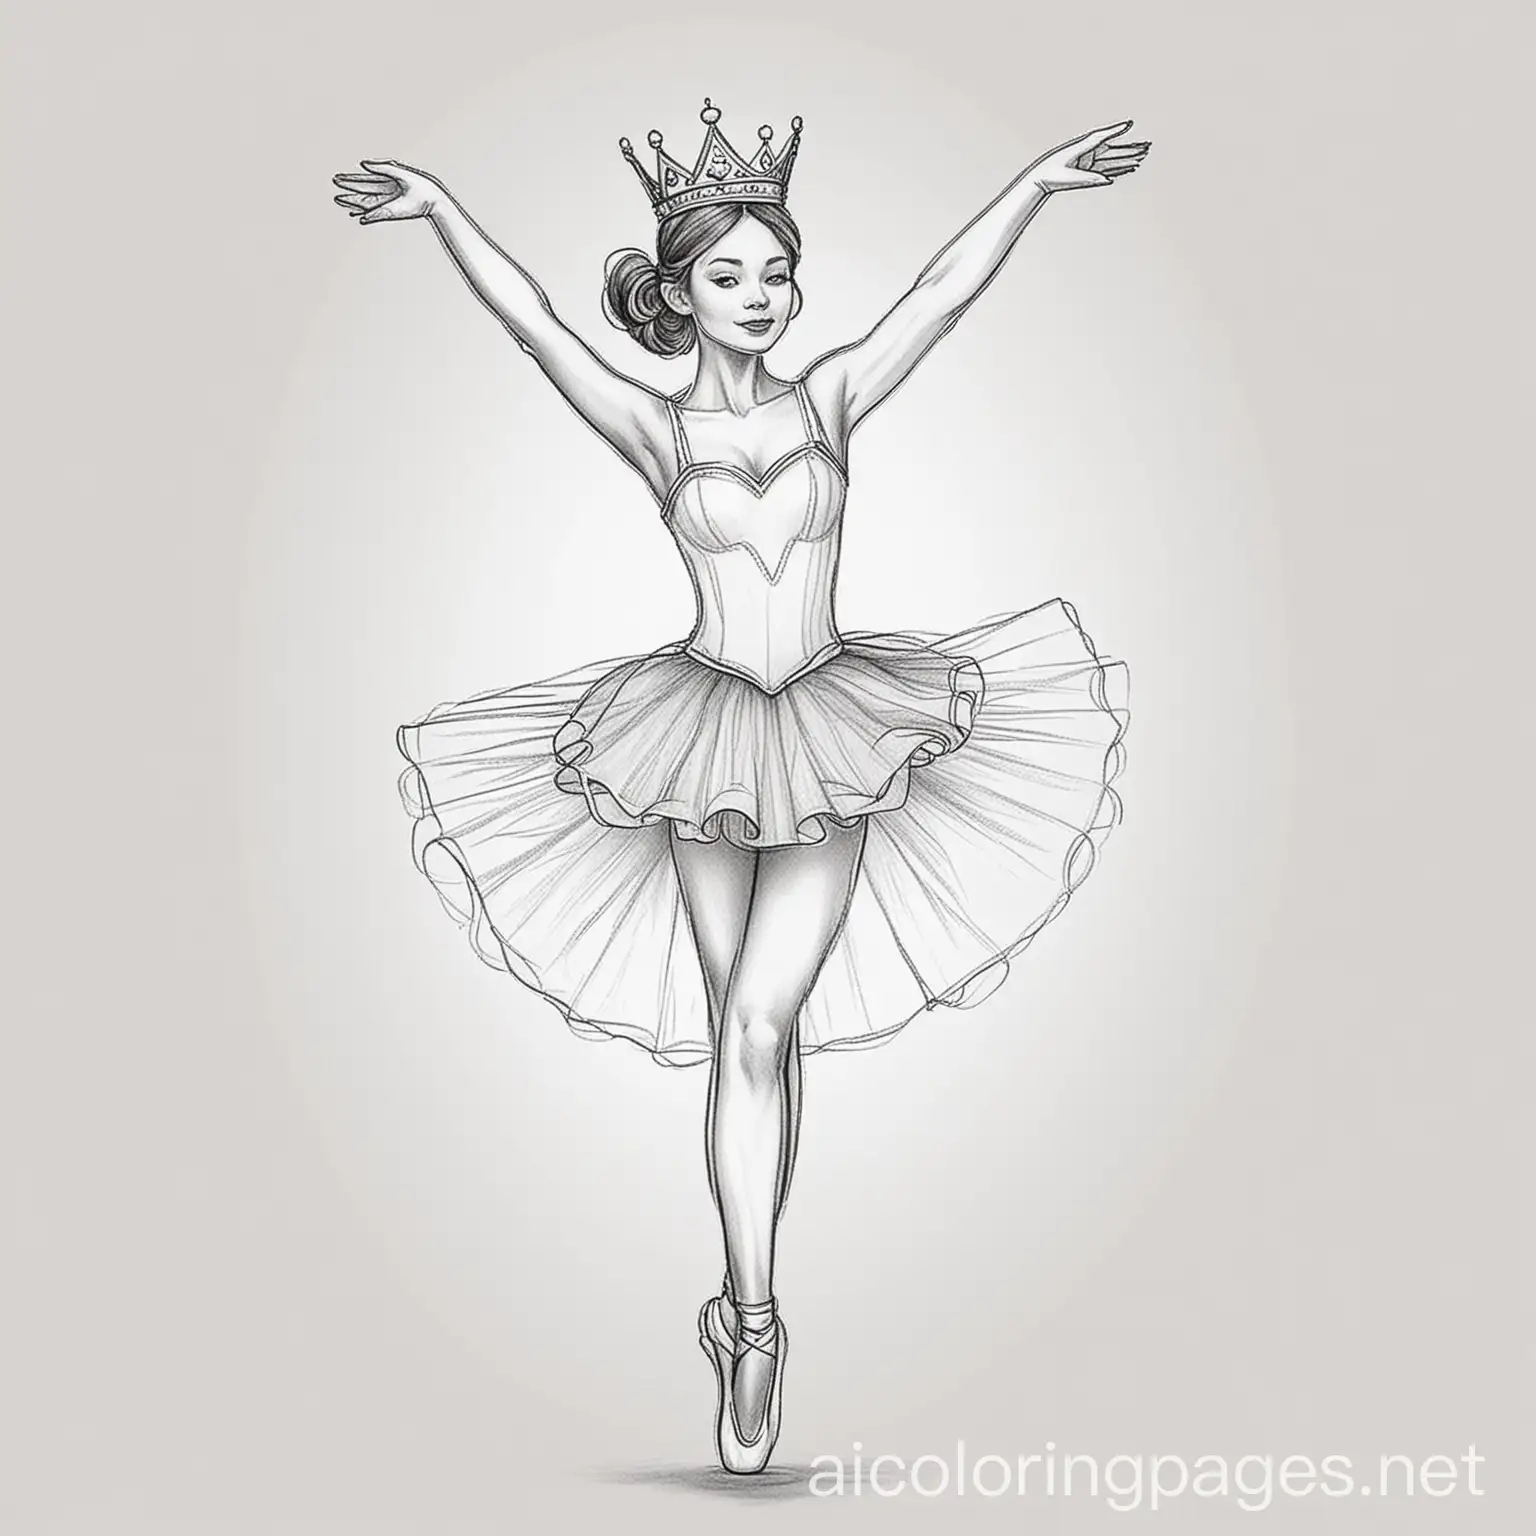 ballerina wearing a tutu and a crown with a heart on it doing a twirling jump with her feet crossed and her arms above her head, Coloring Page, black and white, line art, white background, Simplicity, Ample White Space